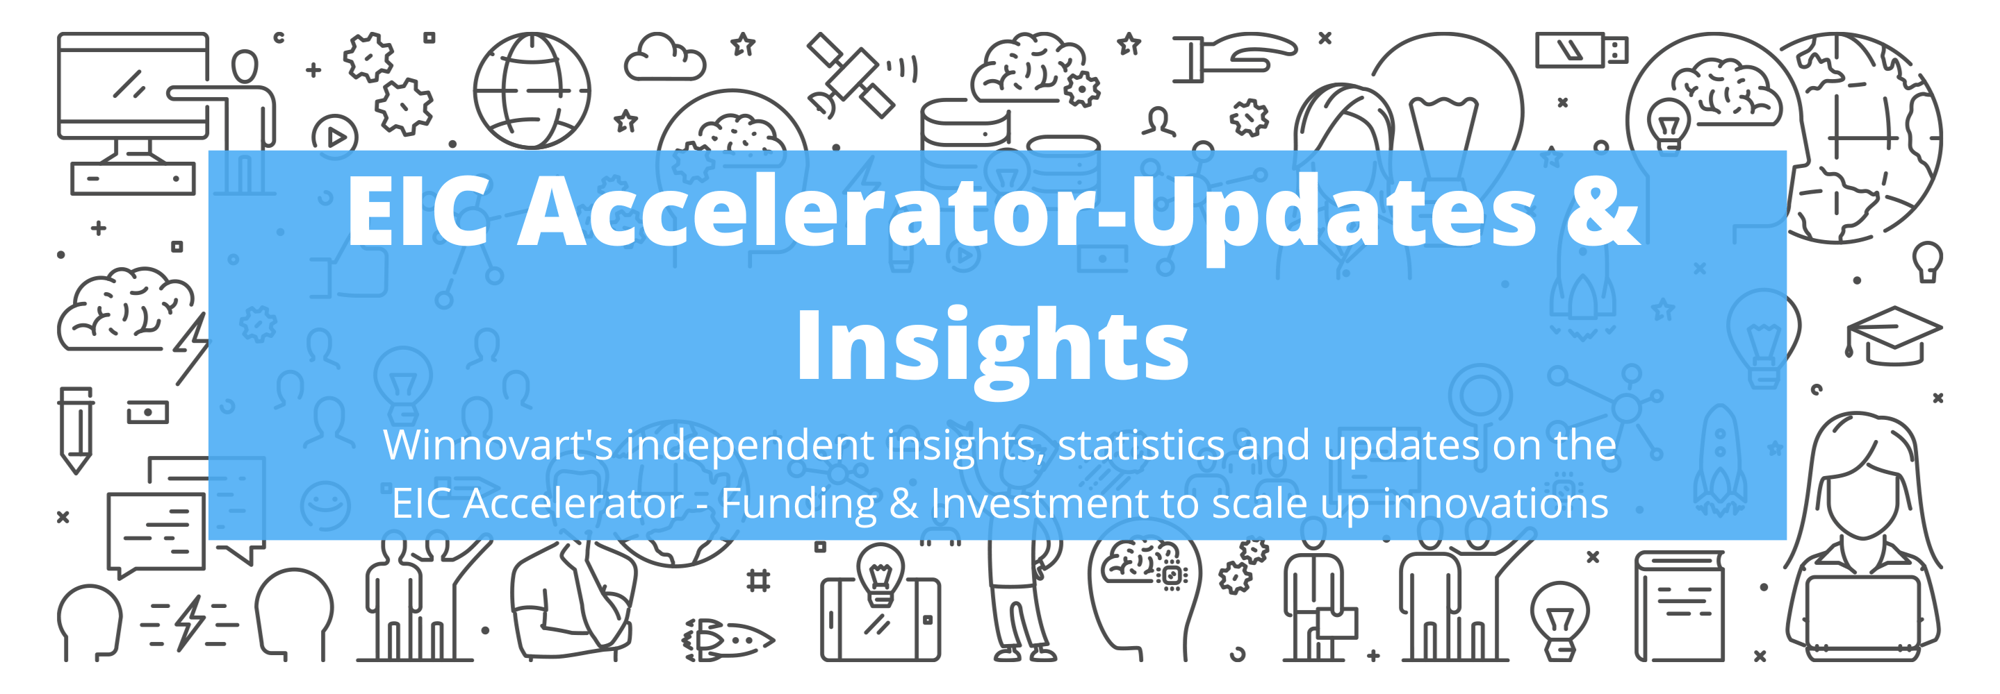 Copy of EIC accelerator- Updates & Insights-1